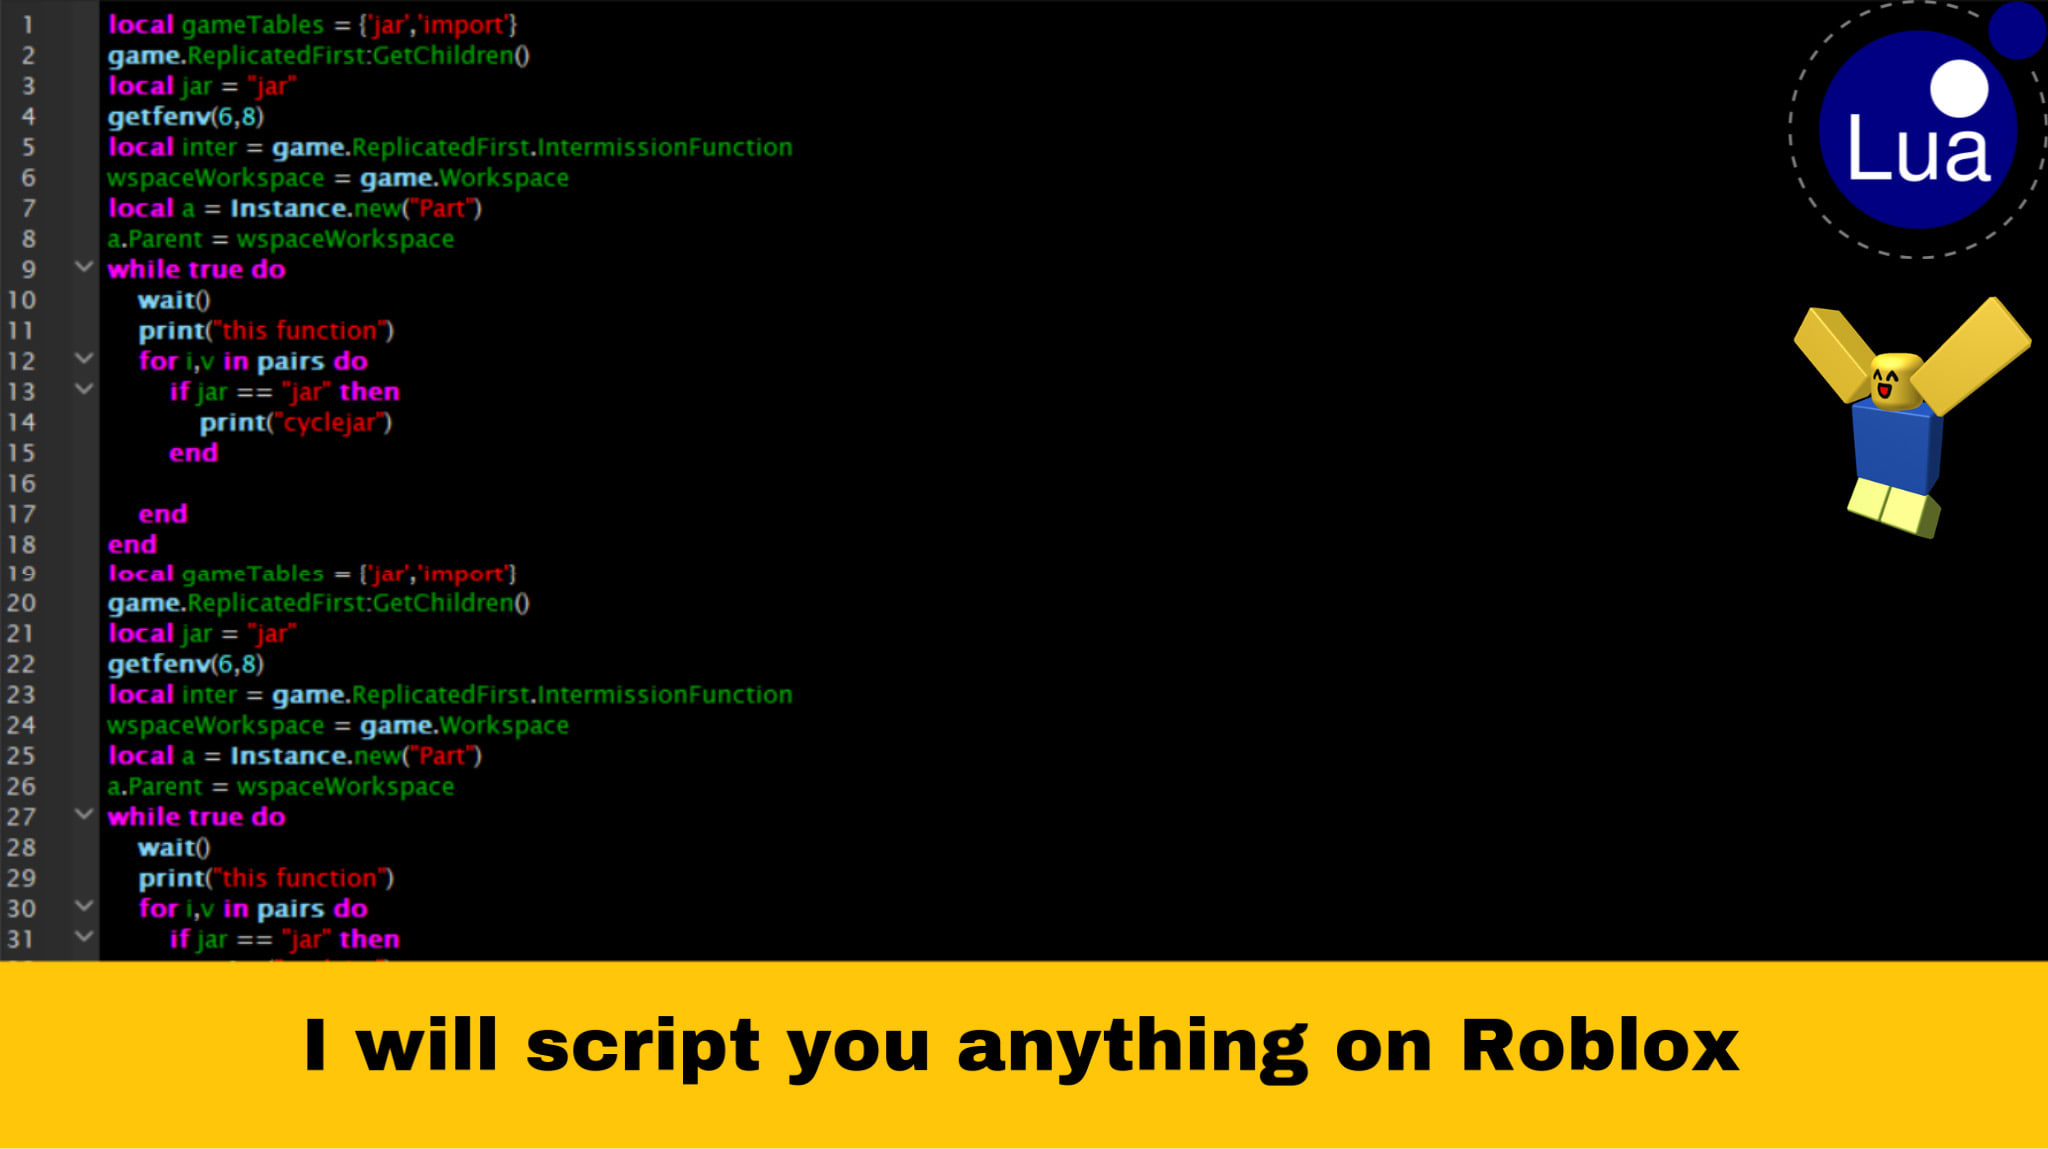 Make A Script Or A System For You On Roblox By Frepzter - roblox anti cheat system